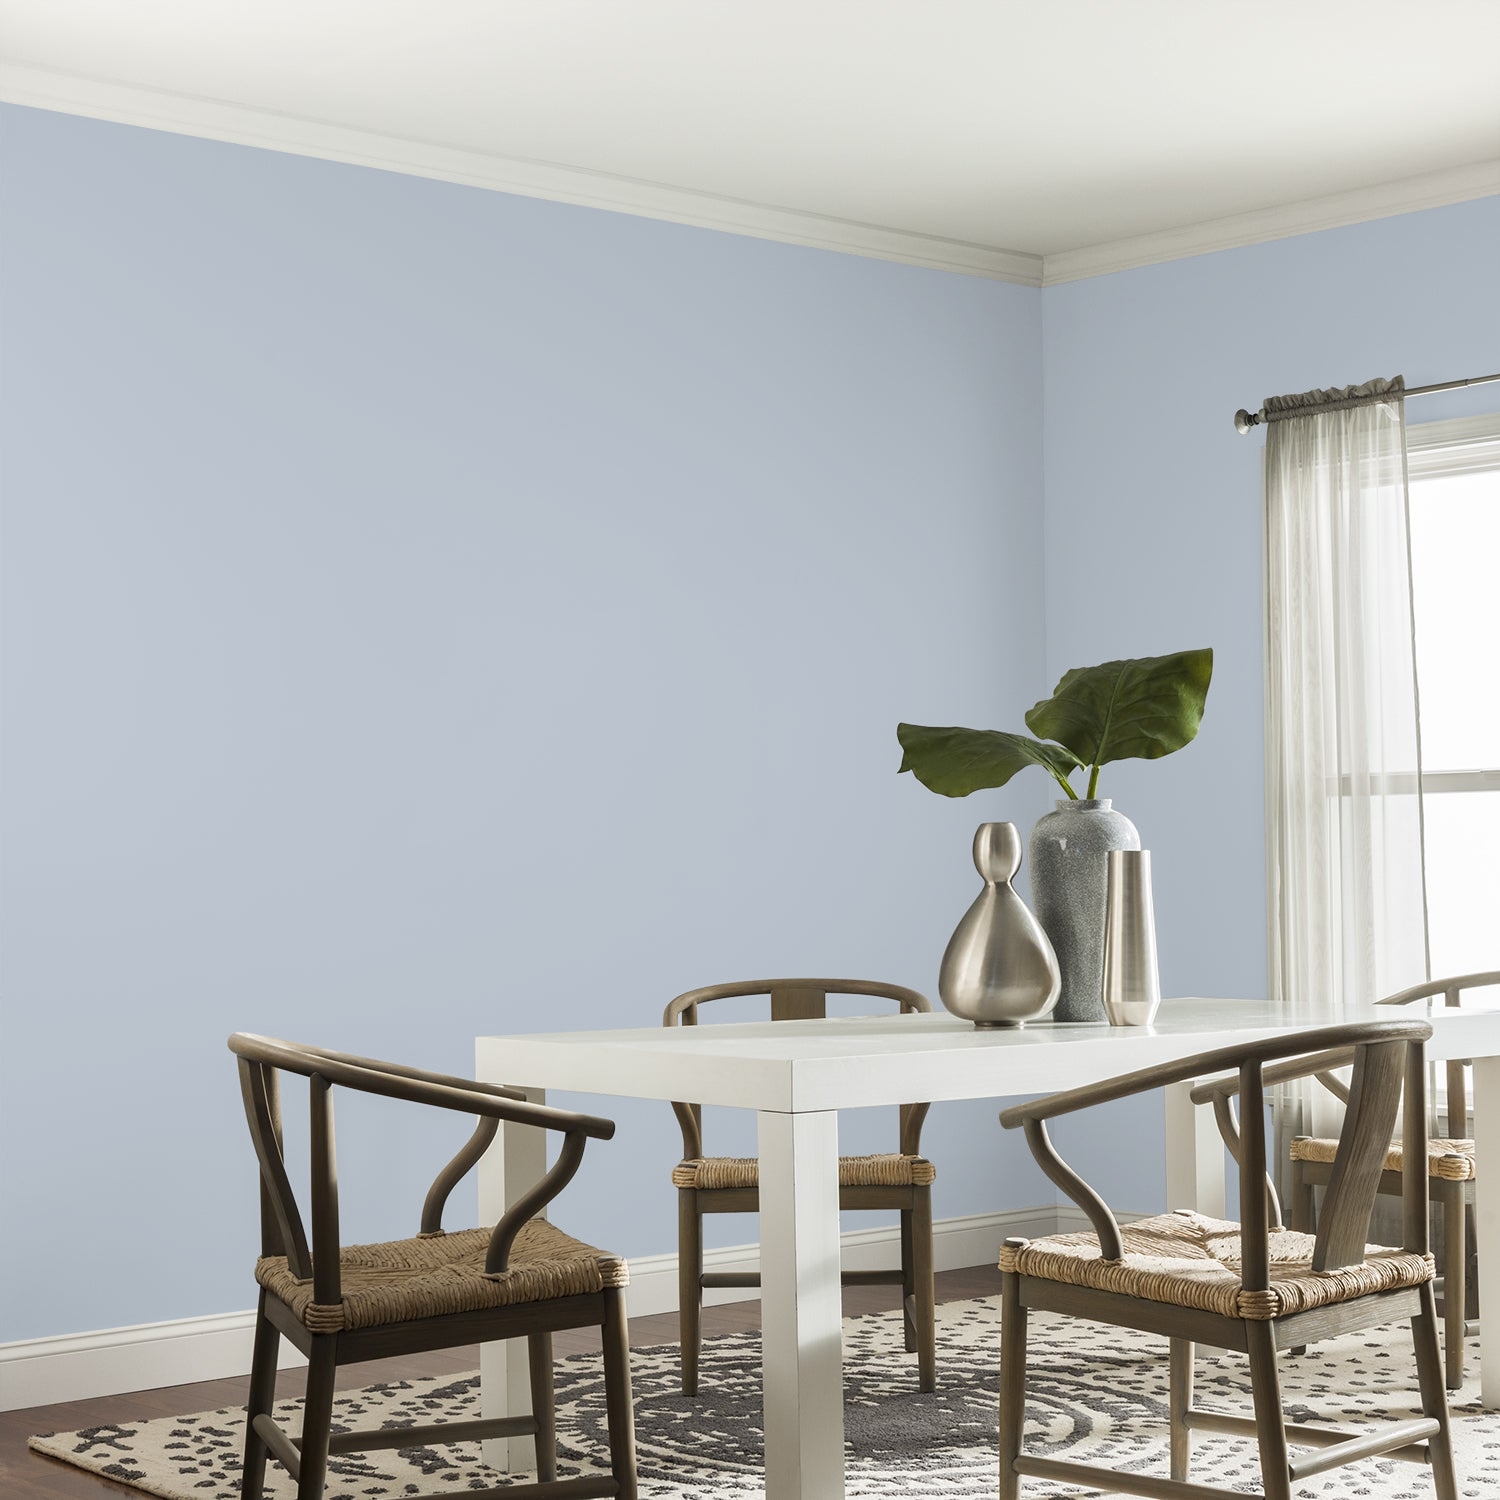 Glidden One Coat Interior Paint and Primer, Blue Dolphin / Blue, Gallon, Eggshell - image 2 of 11